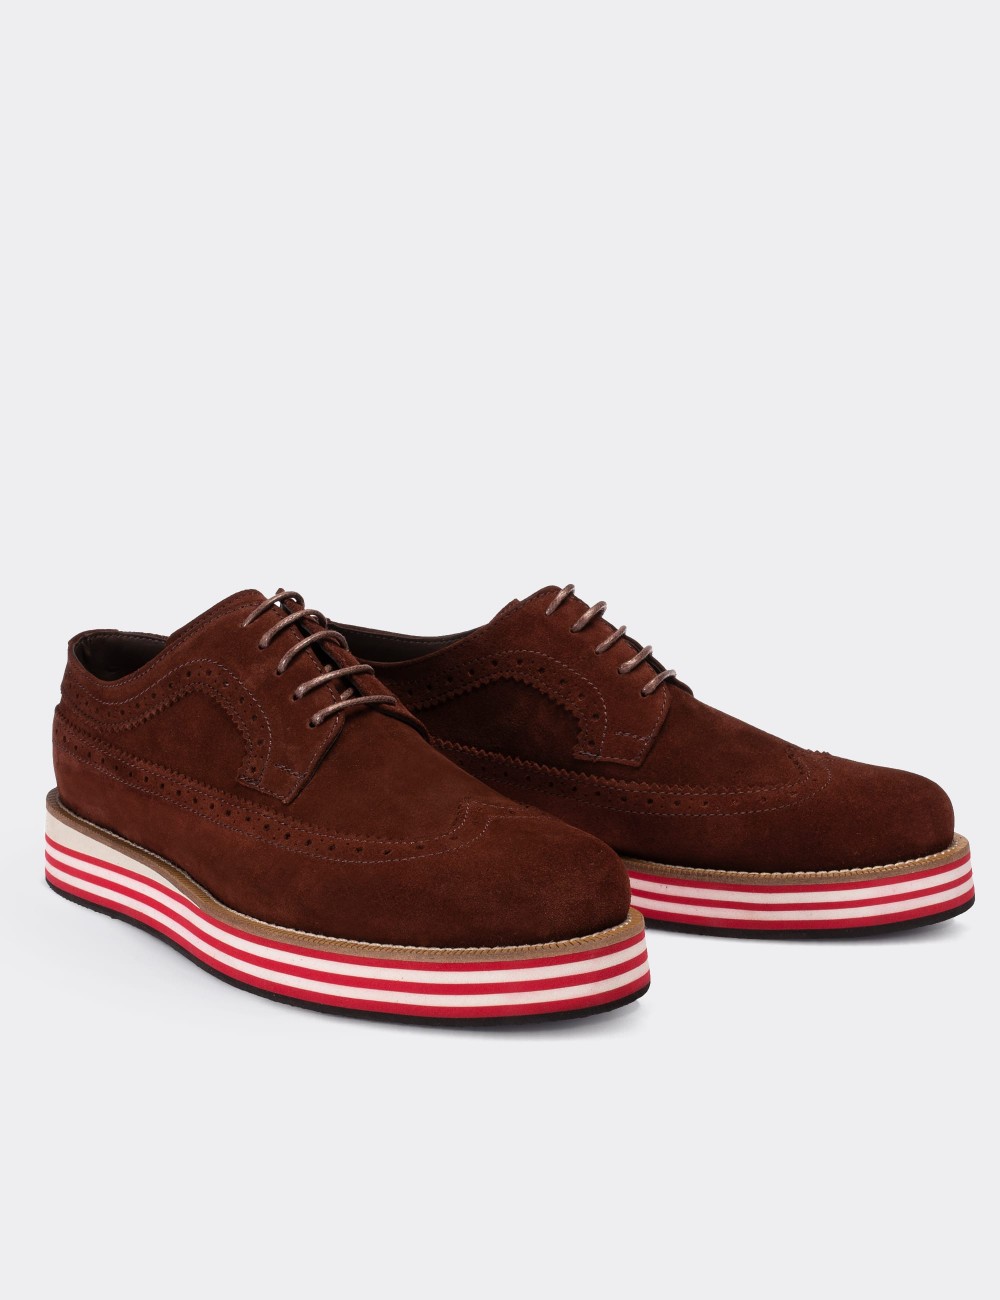 Burgundy Suede Leather Lace-up Shoes - 01293MBRDE16